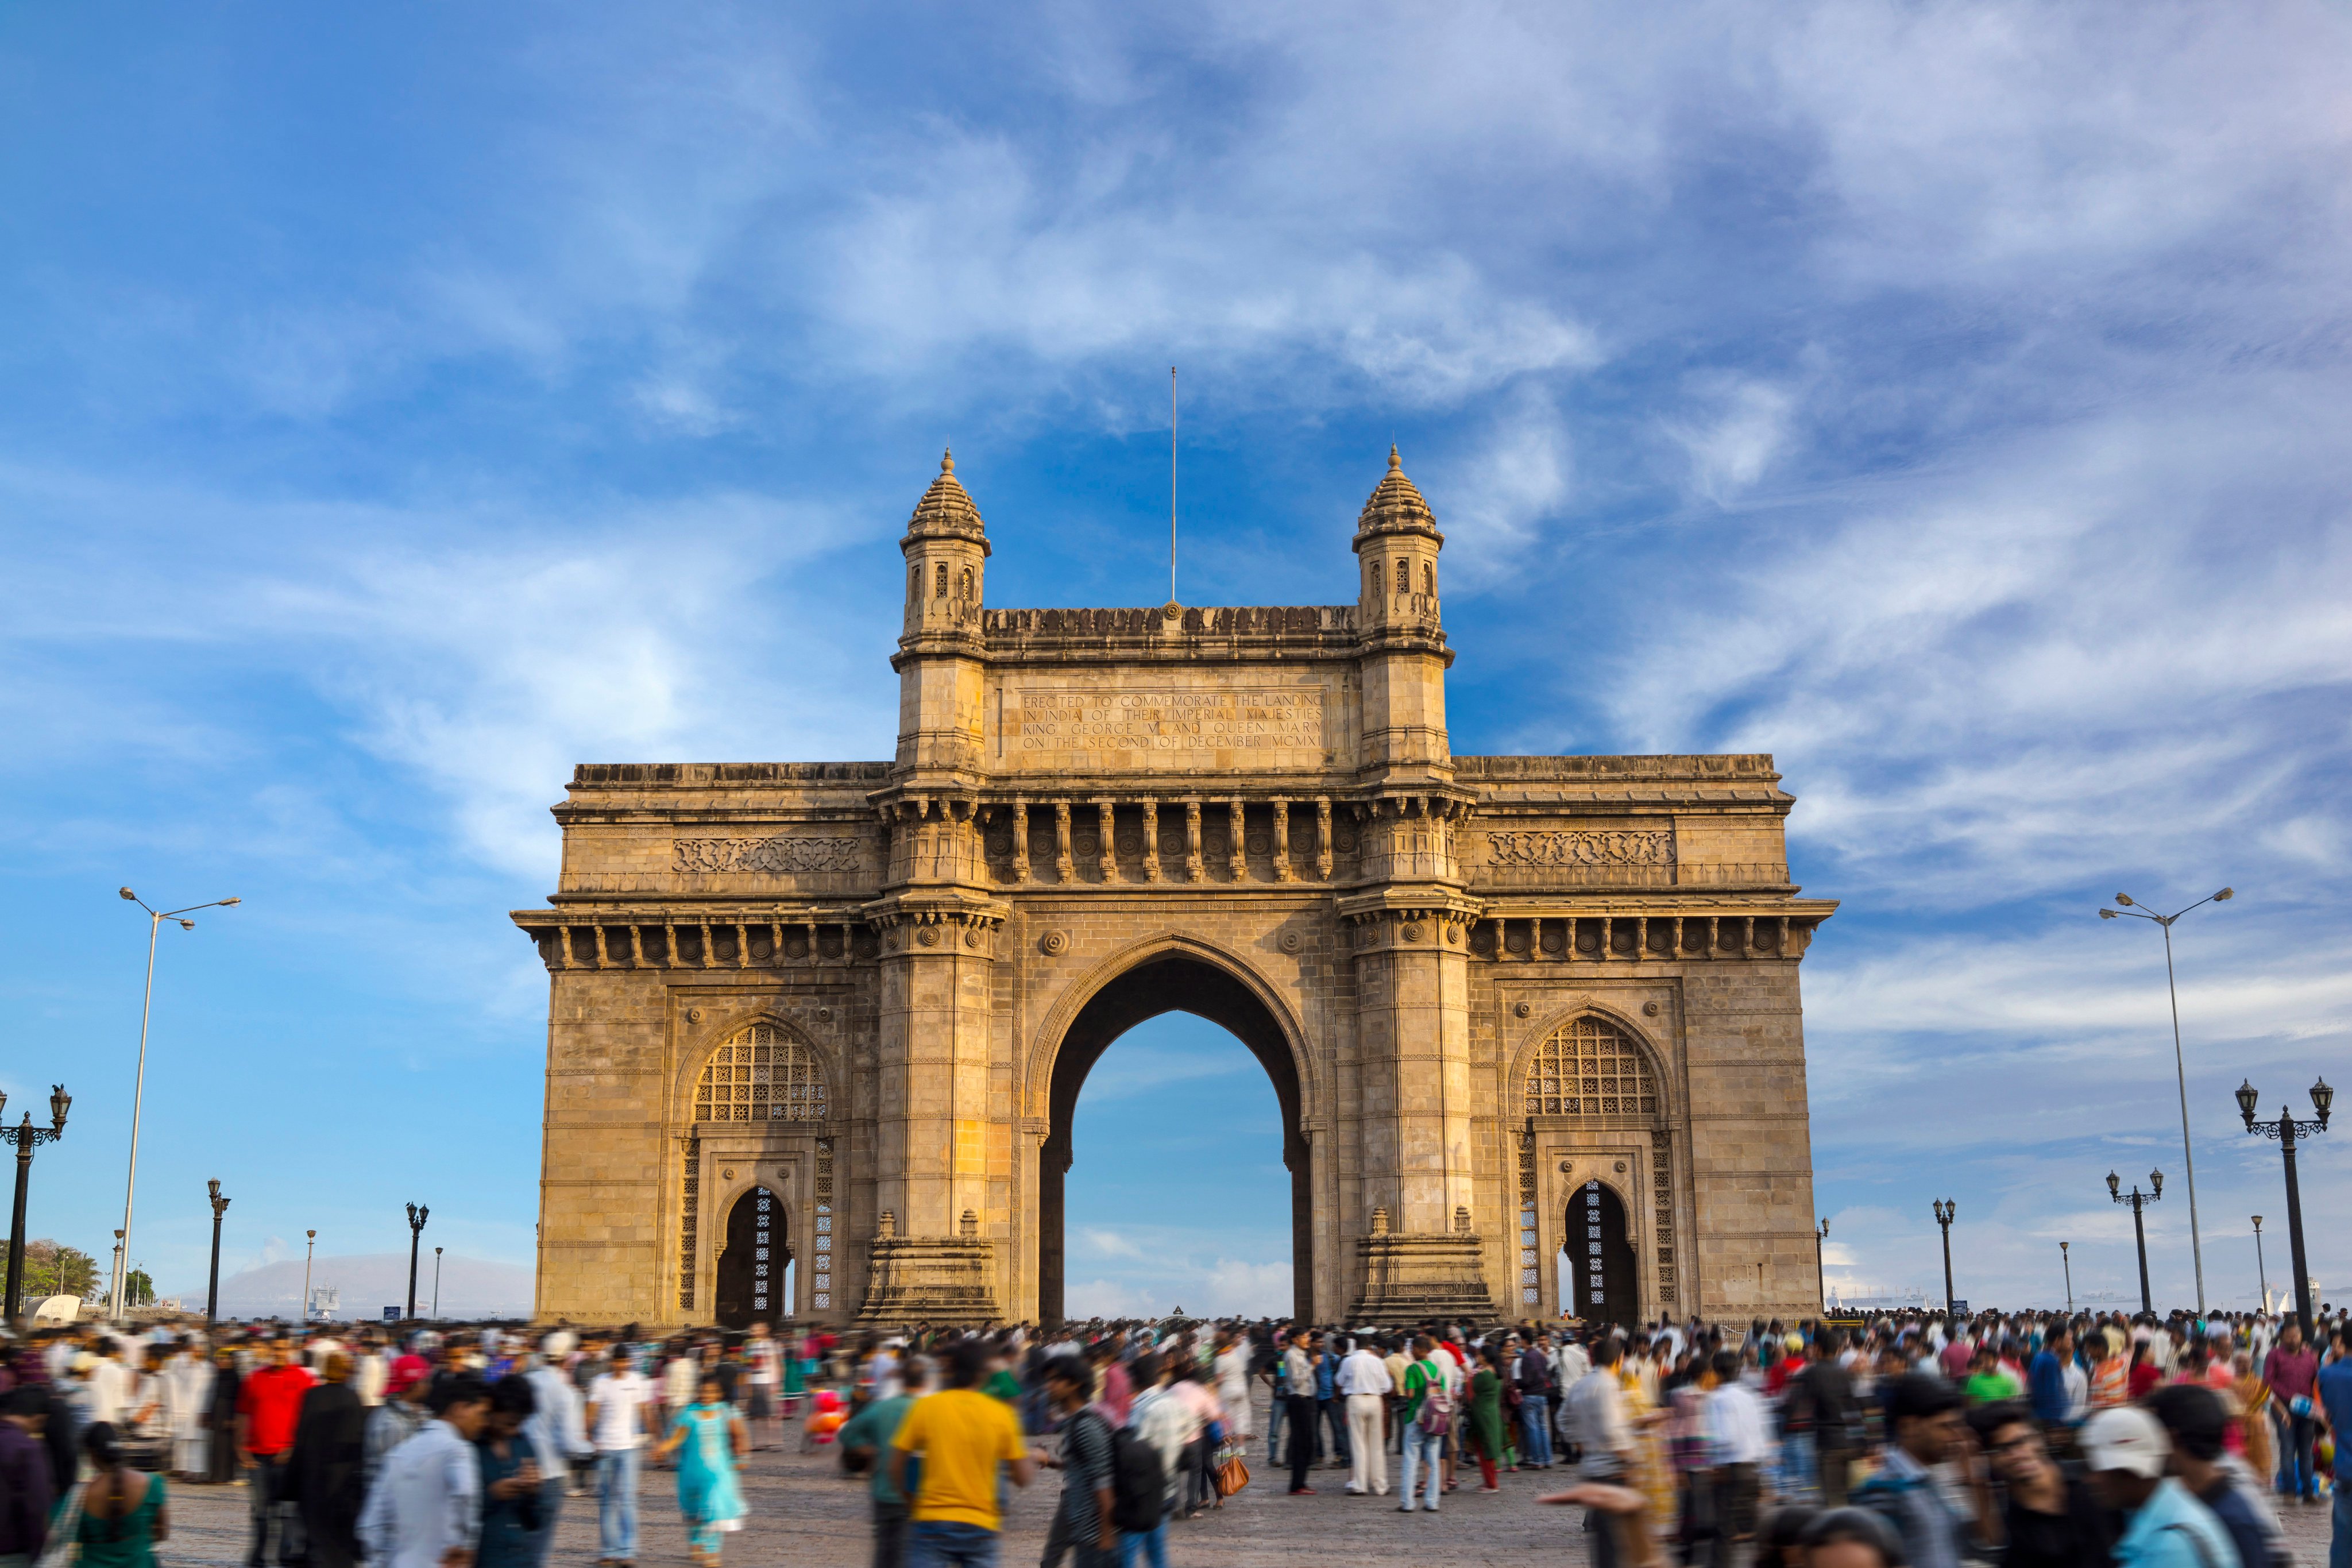 Tourists swarm the world famous Gateway of India monument in Mumbai. India is tipped by some analysts to be the next engine of growth for the hotel industry in the Asia-Pacific region. Photo: Getty Images